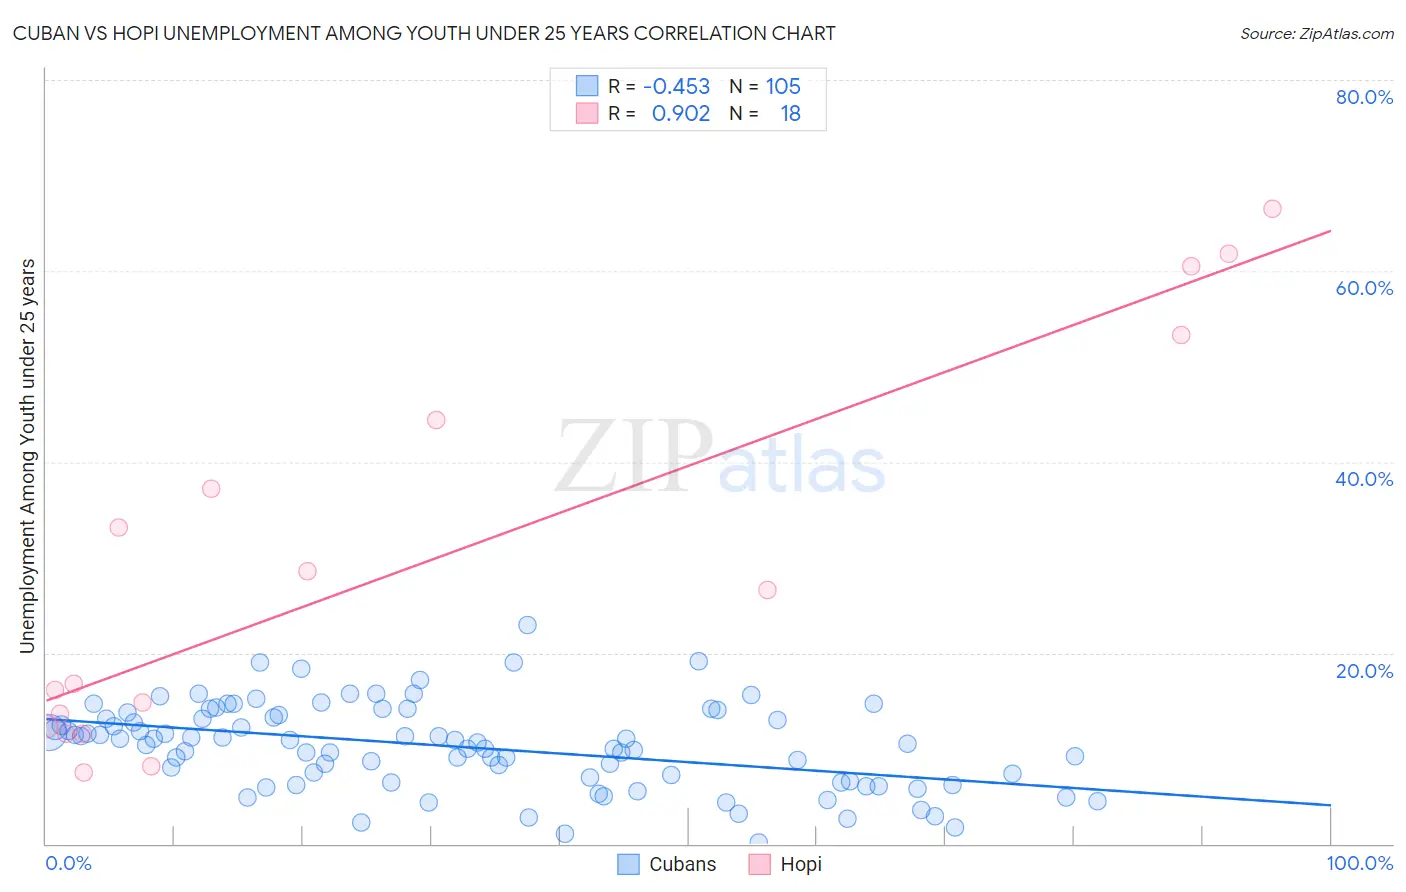 Cuban vs Hopi Unemployment Among Youth under 25 years